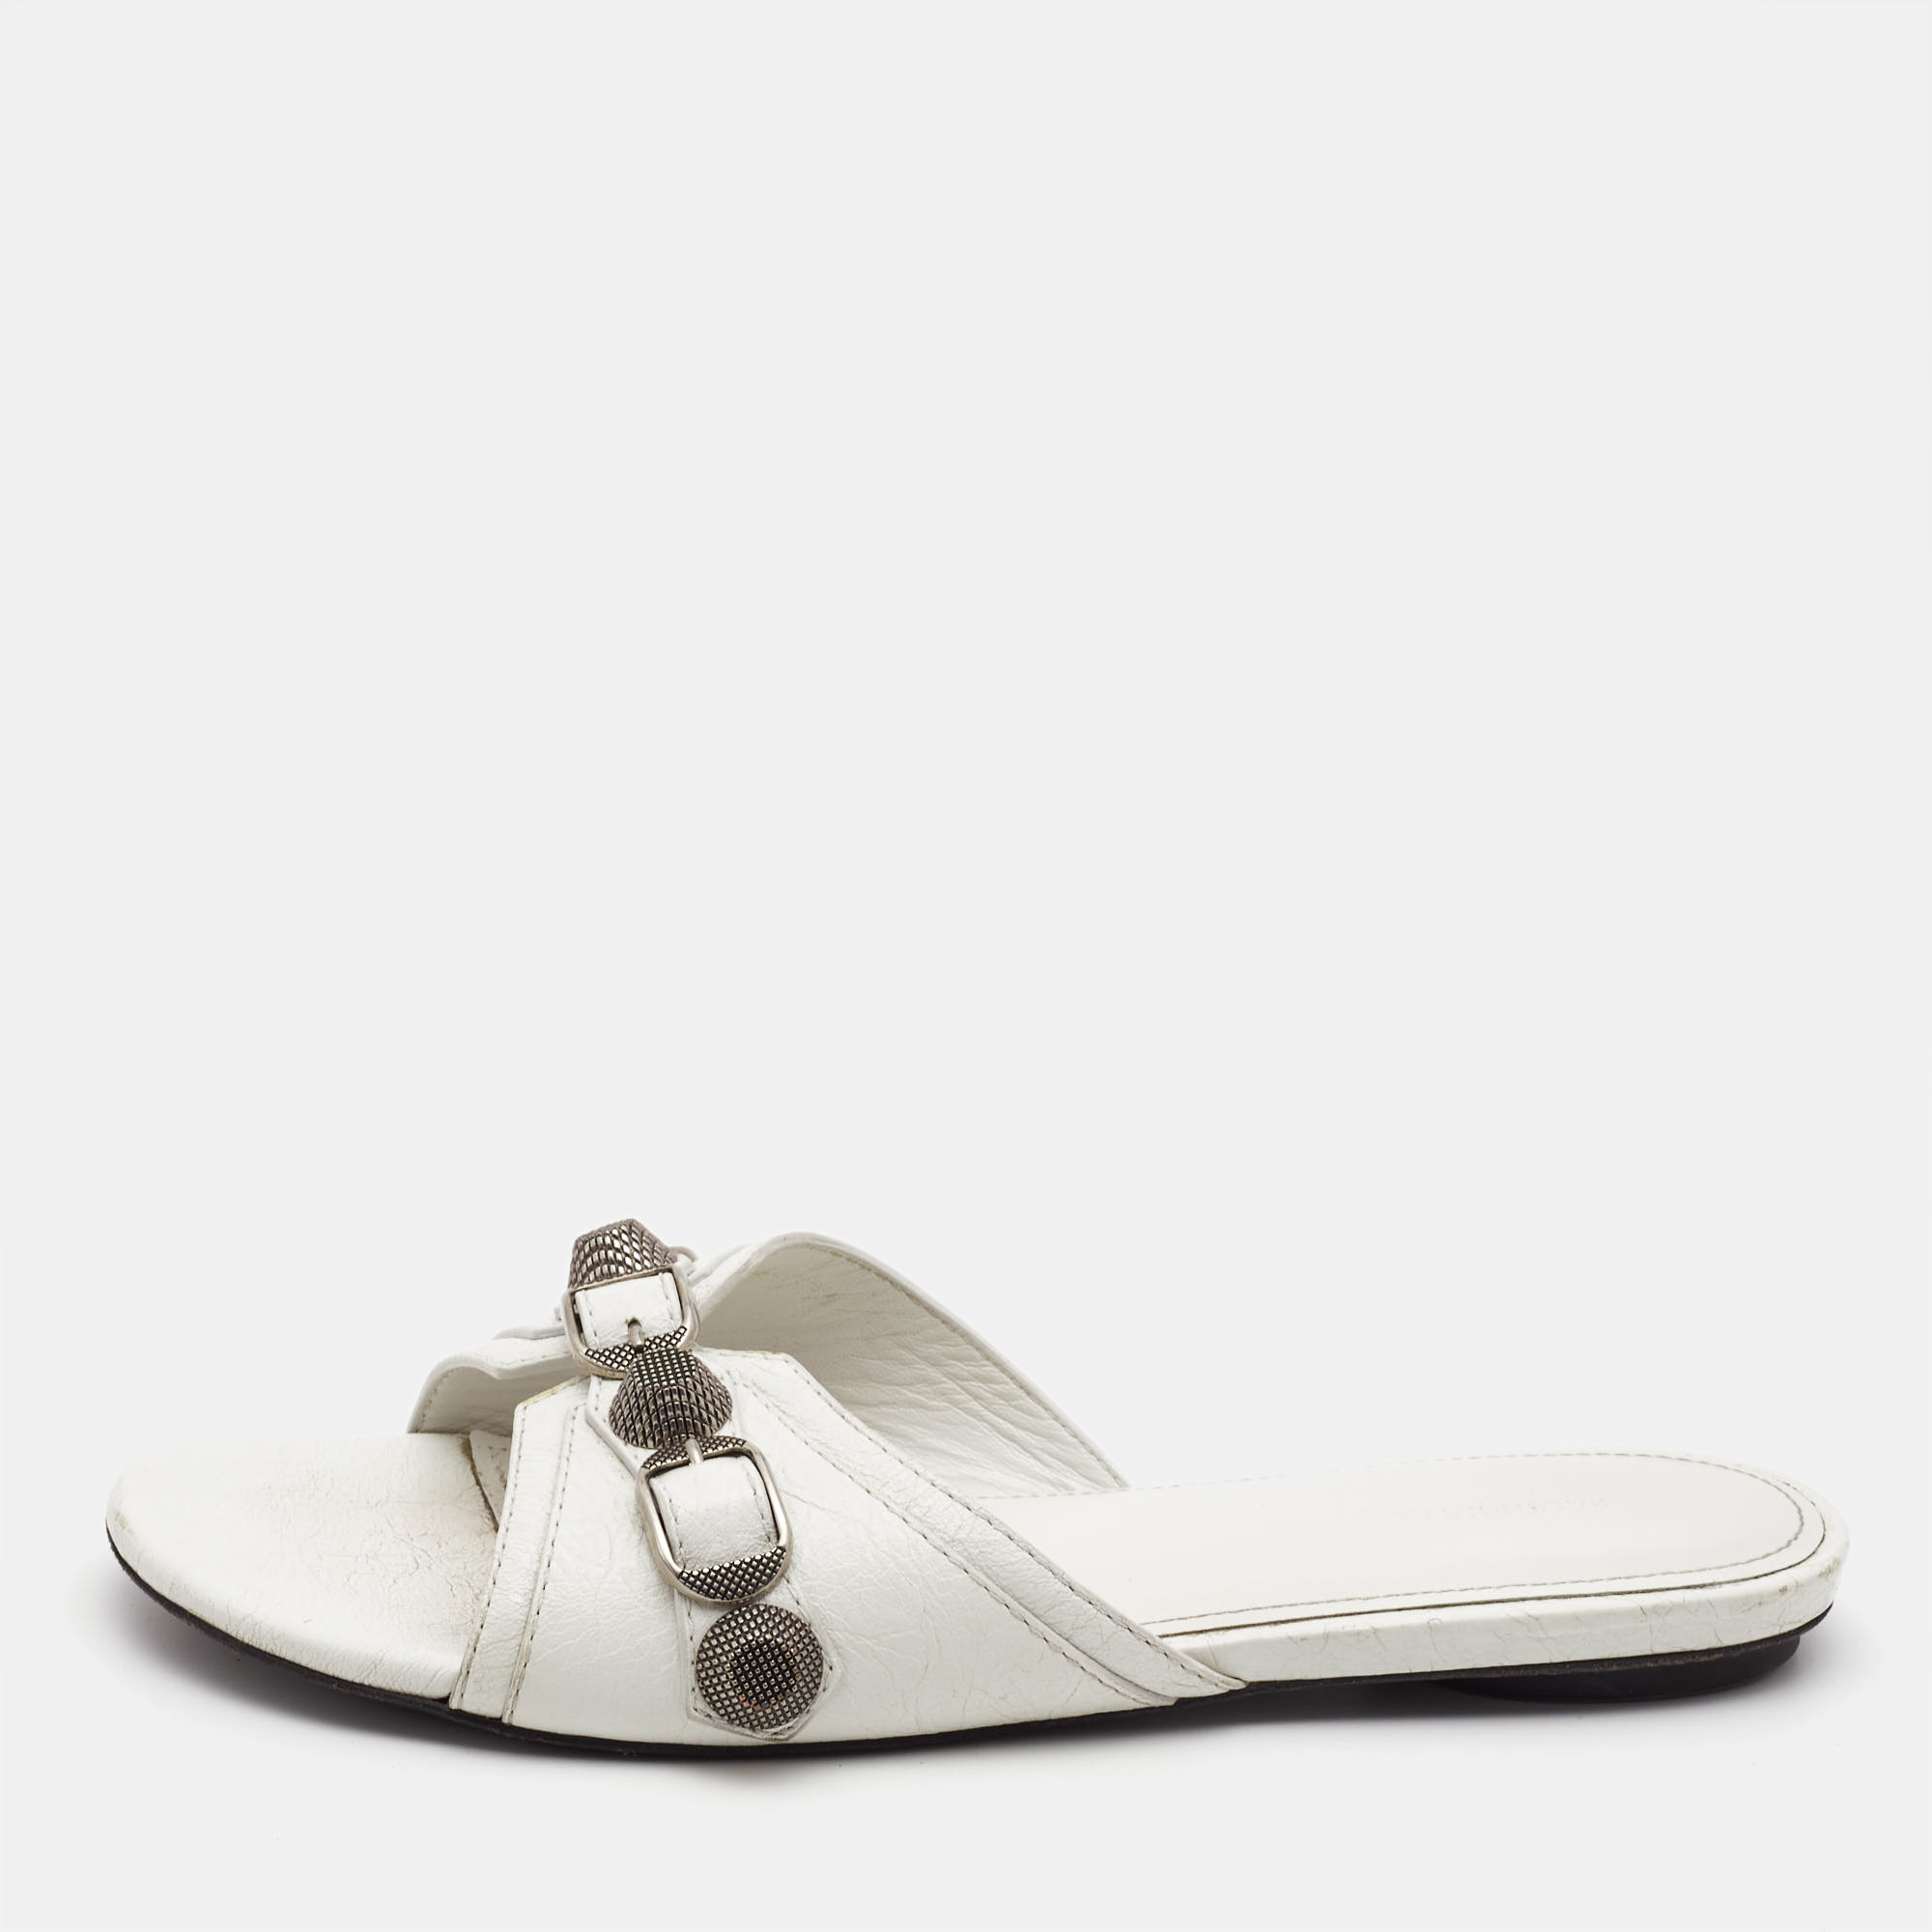 Pre-owned Balenciaga White Leather Cagole Flat Slides Size 36